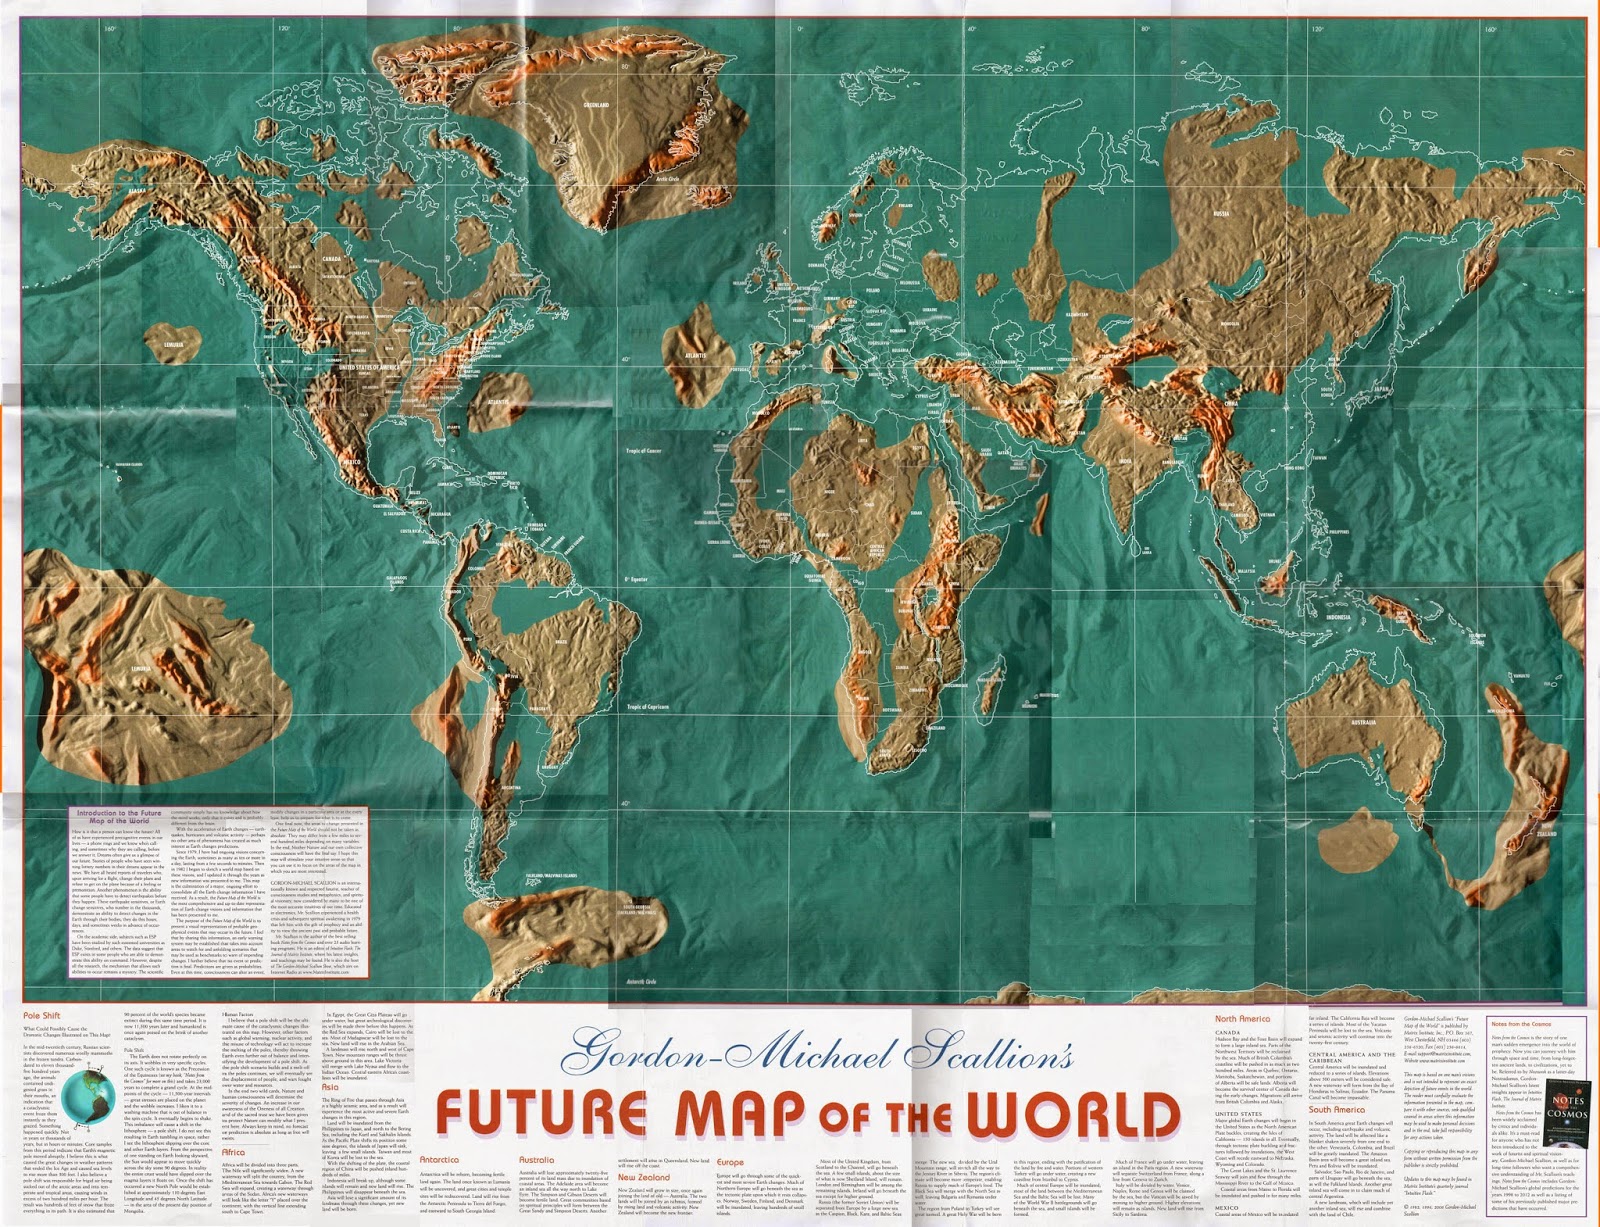 US NAVY MAP of the FUTURE is this NOW?? - THE REAL SIGNS OF TIMES1600 x 1227